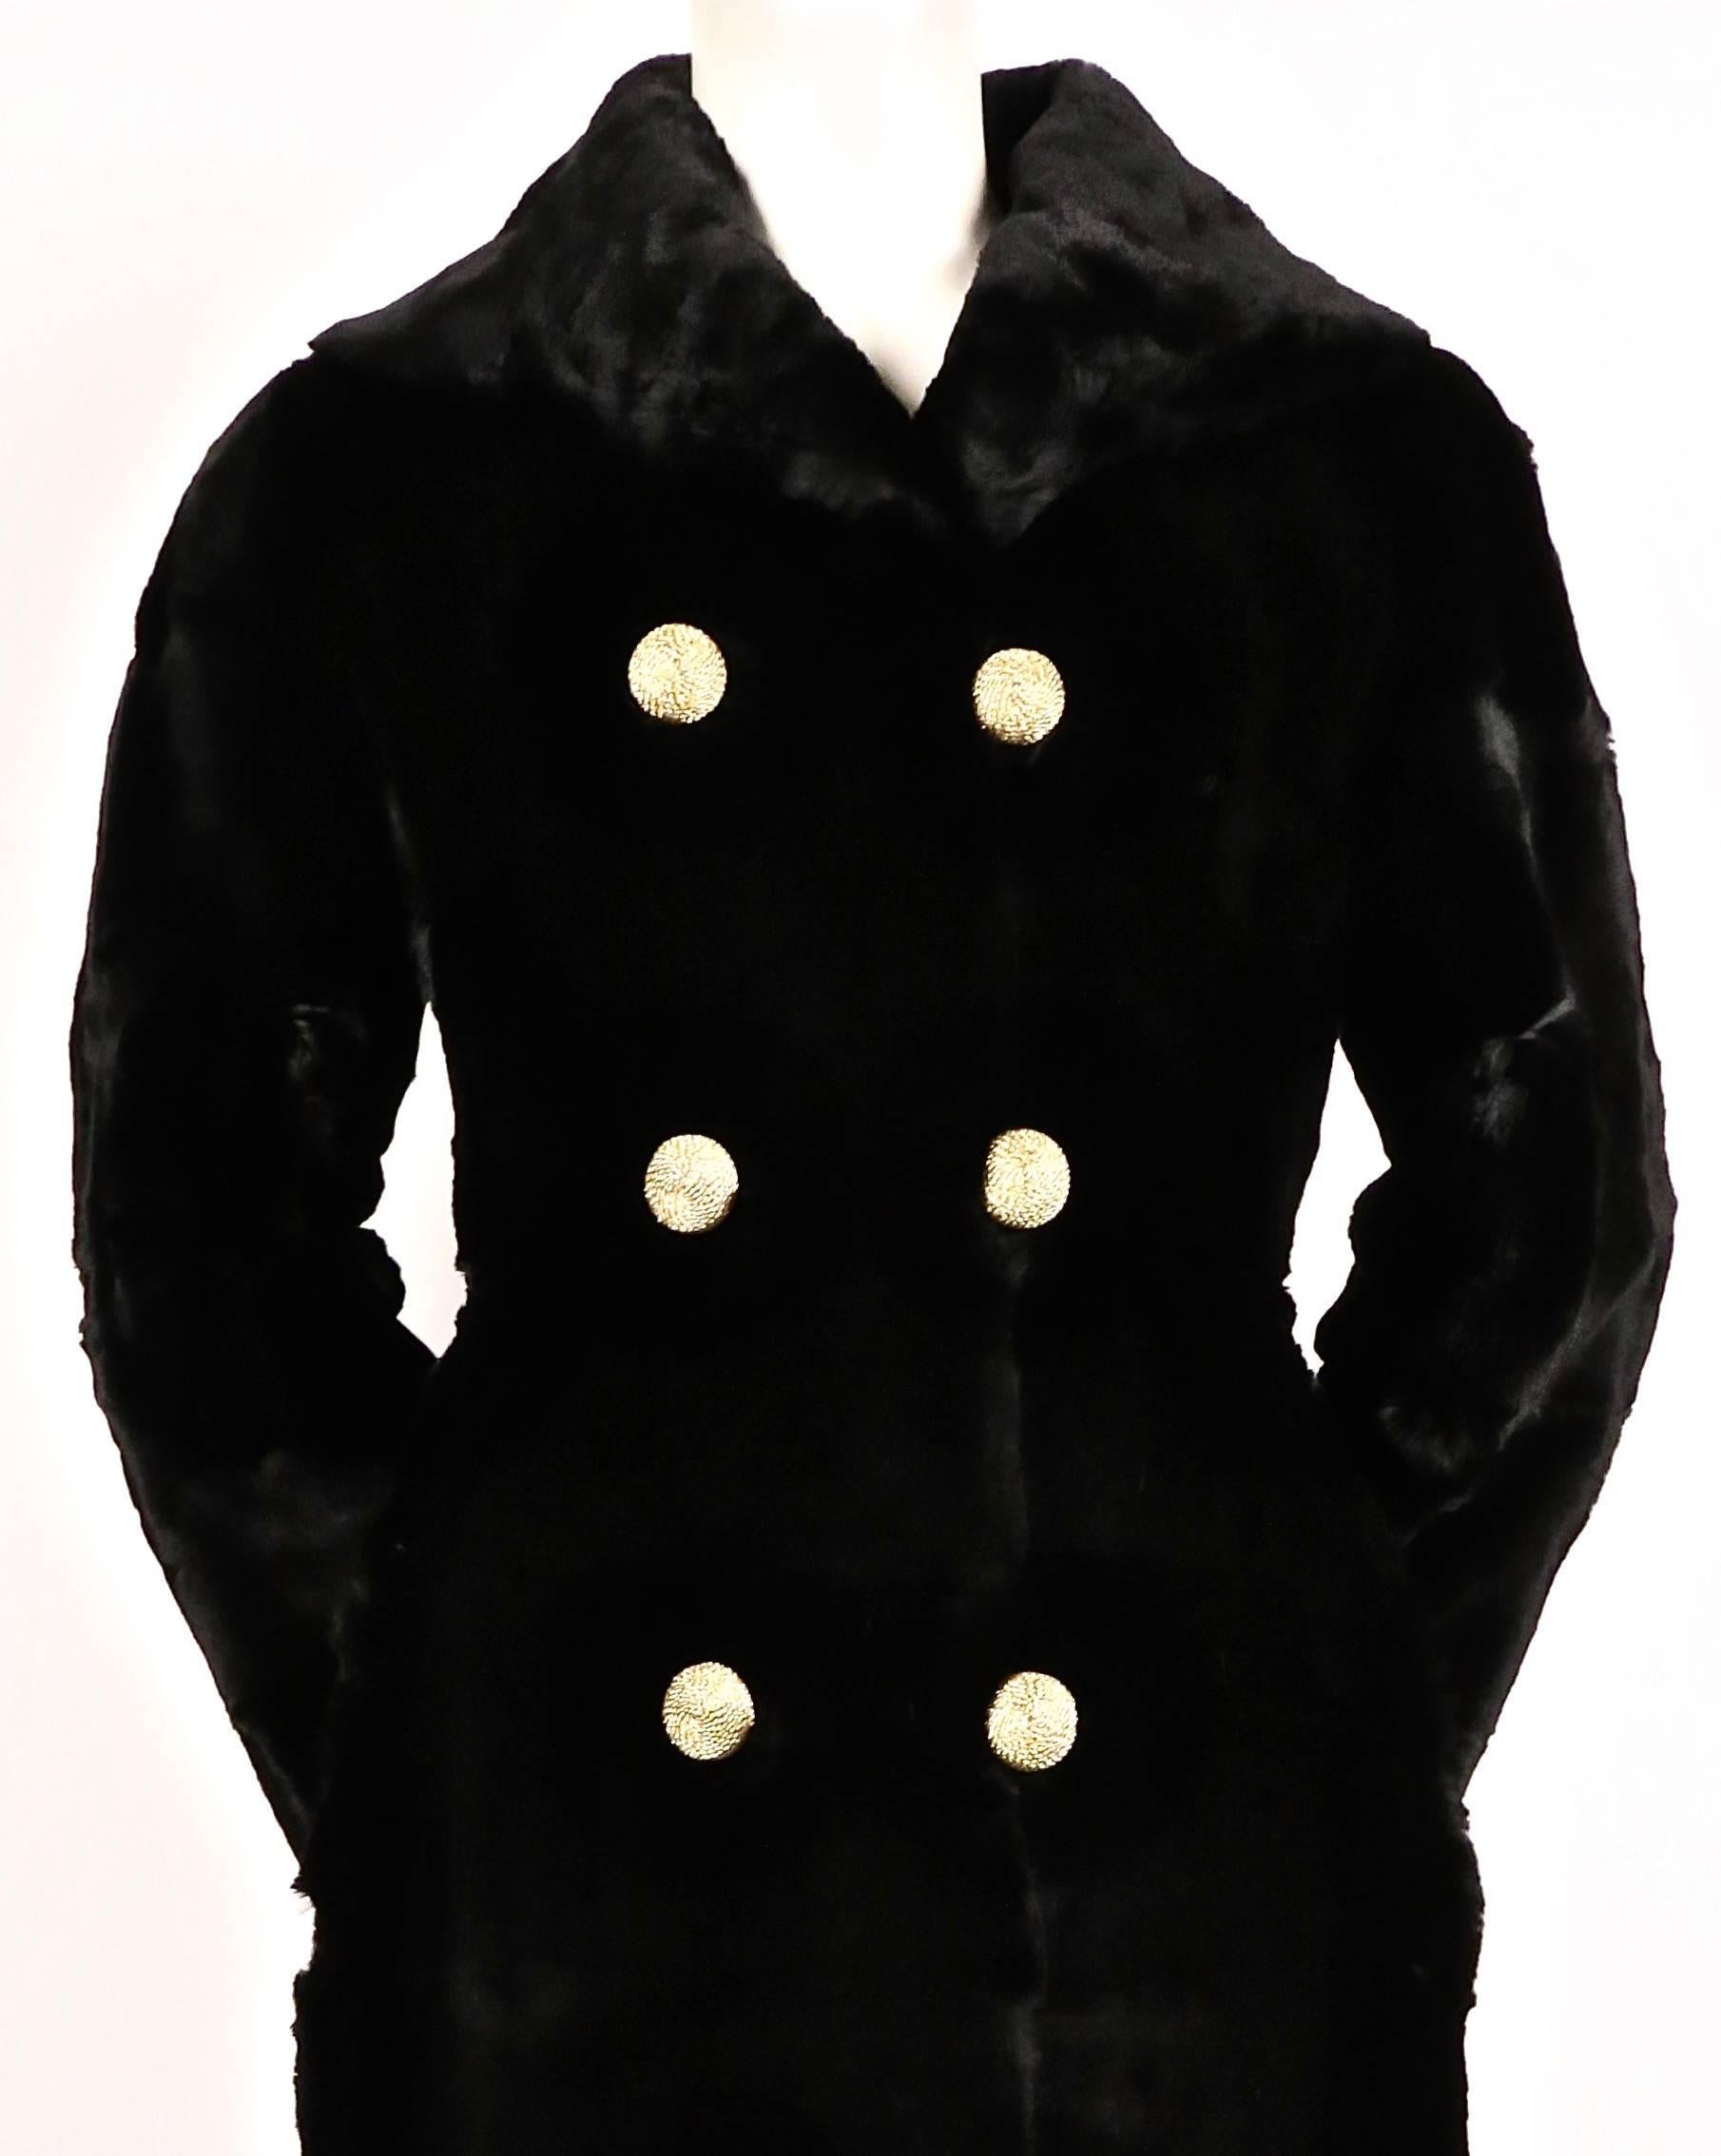 Sheared, black, seal fur, full length coat with gold buttons designed by Revillon for Saks Fifth Avenue dating to the 1960's. Fits a US size 2 or 4. Coat measures 33